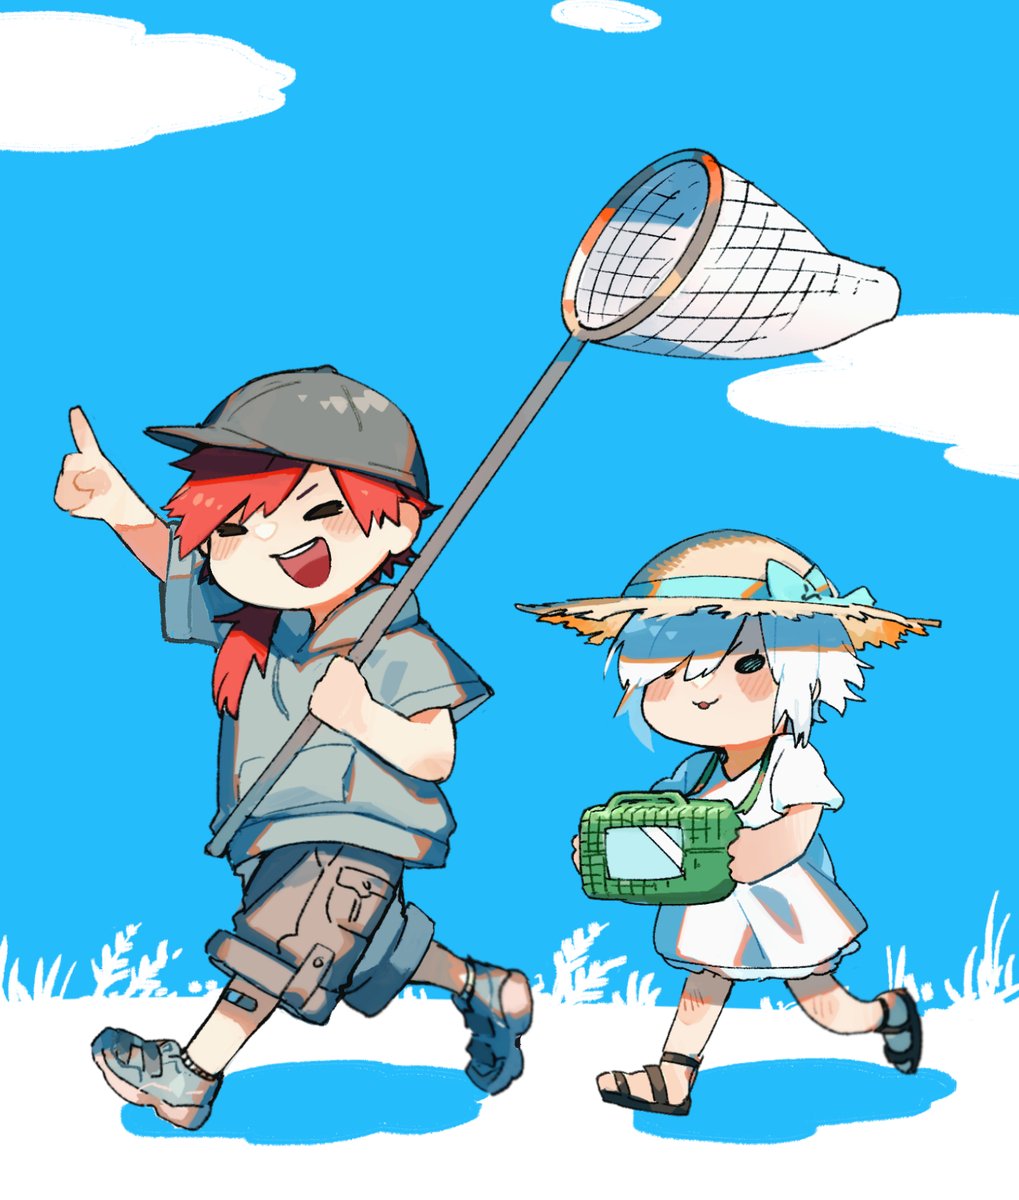 hat white hair red hair smile hand net shorts pointing  illustration images